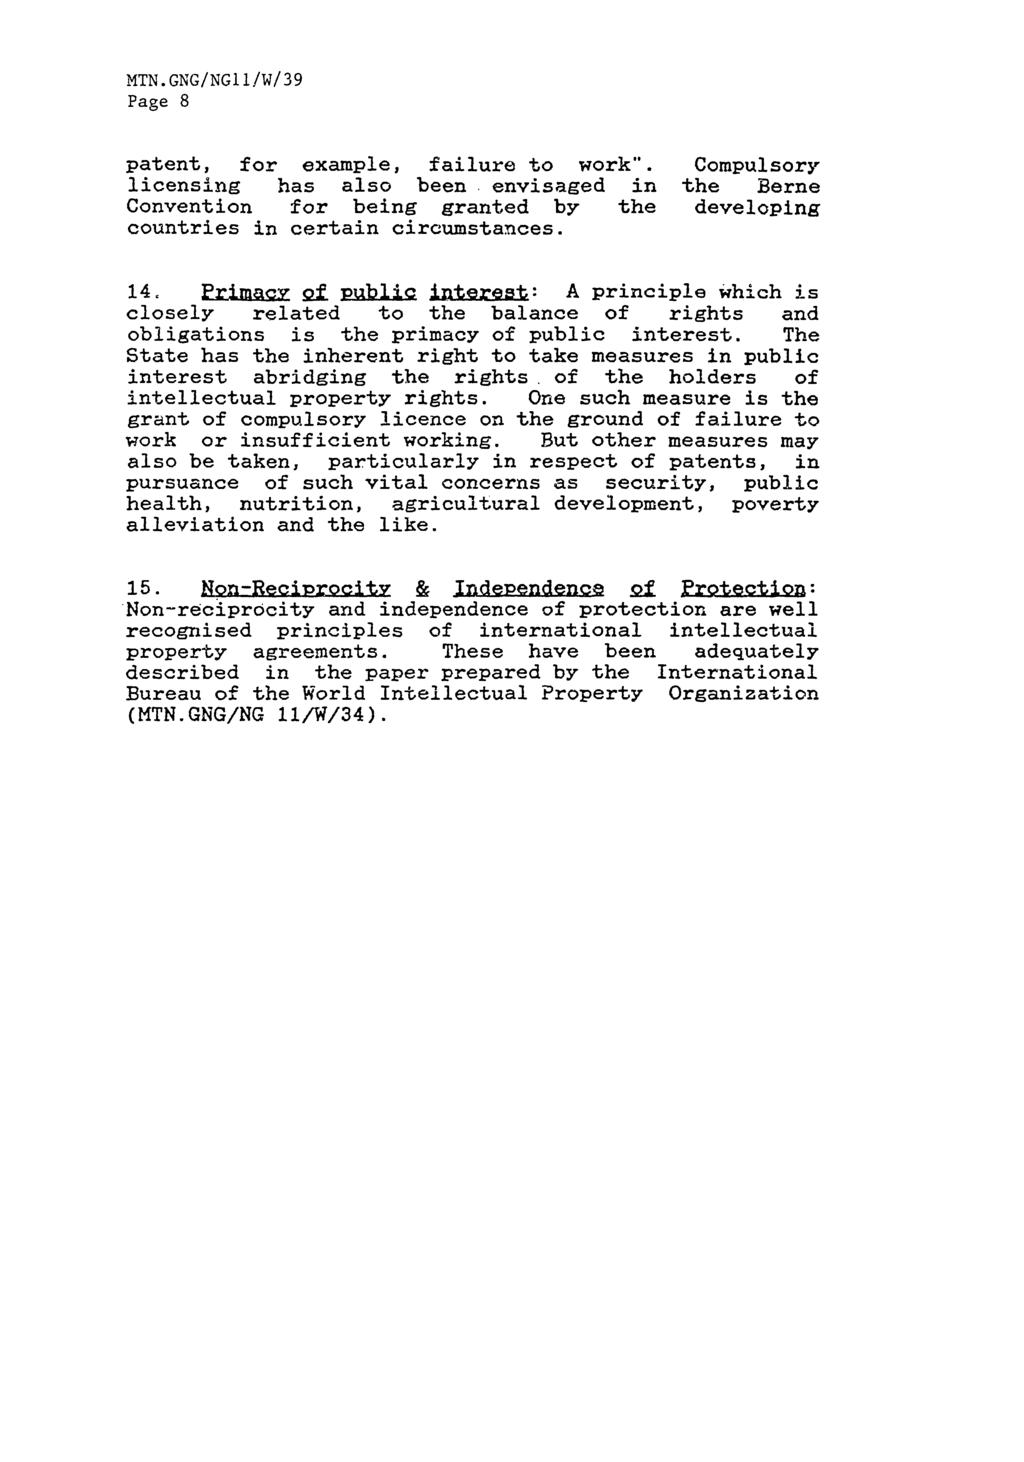 Page 8 patent, for example, failure to work". Compulsory licensing has also been envisaged in the Berne Convention for being granted by the developing countries in certain circumstances. 14.